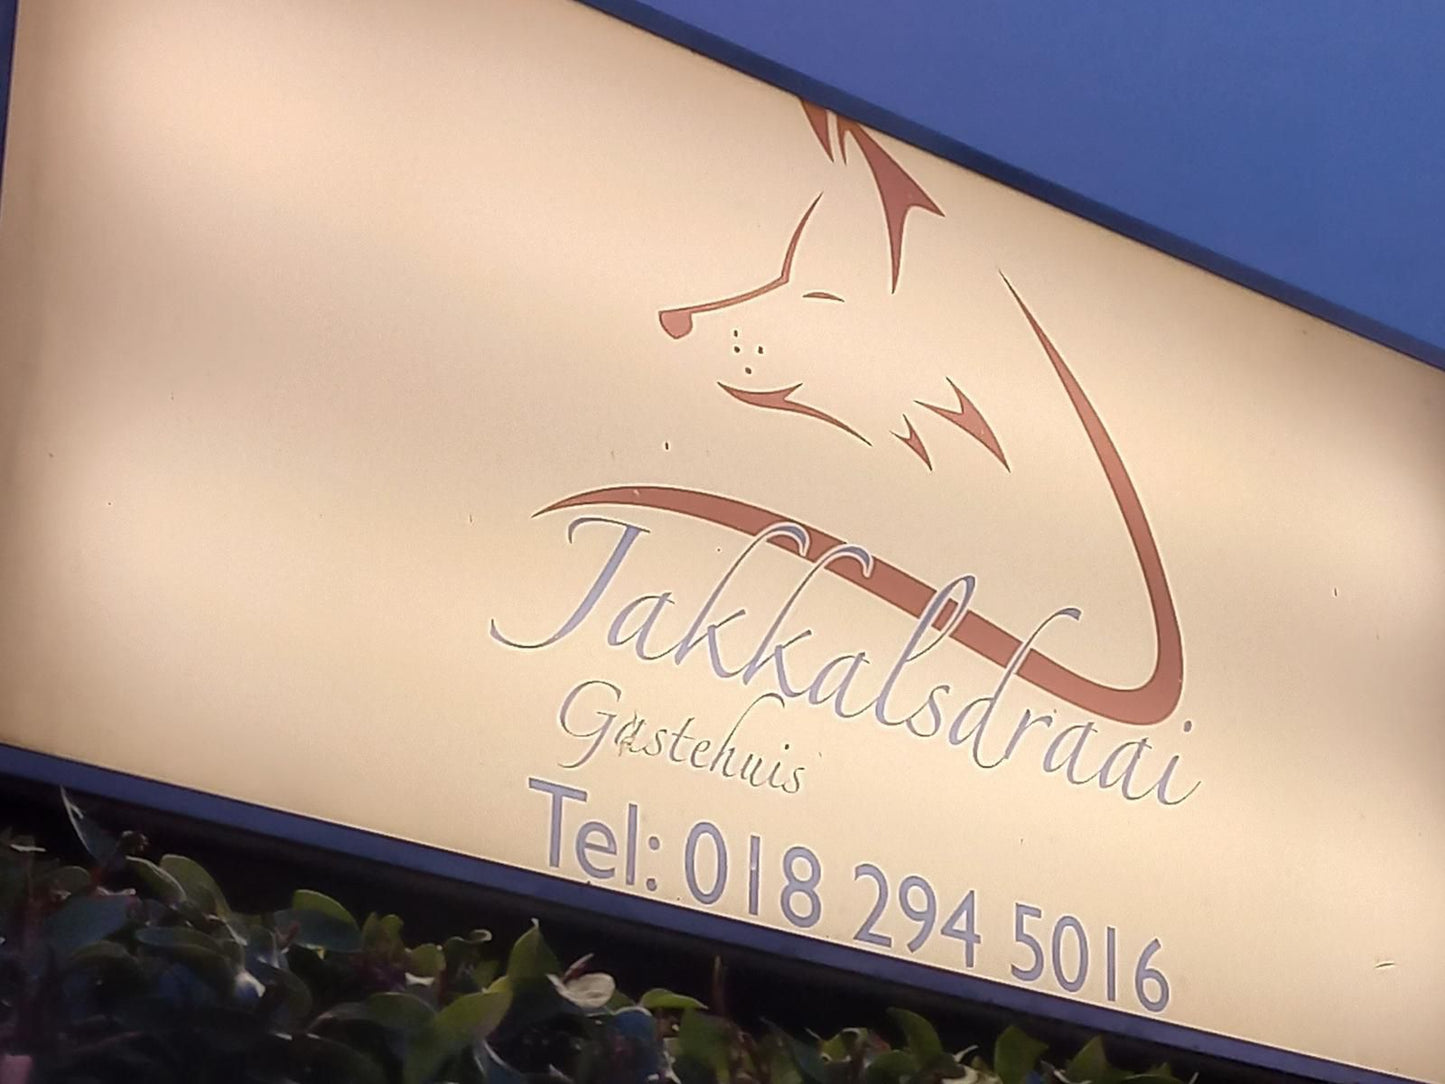 Jakkalsdraai Guesthouse Potchefstroom North West Province South Africa Text